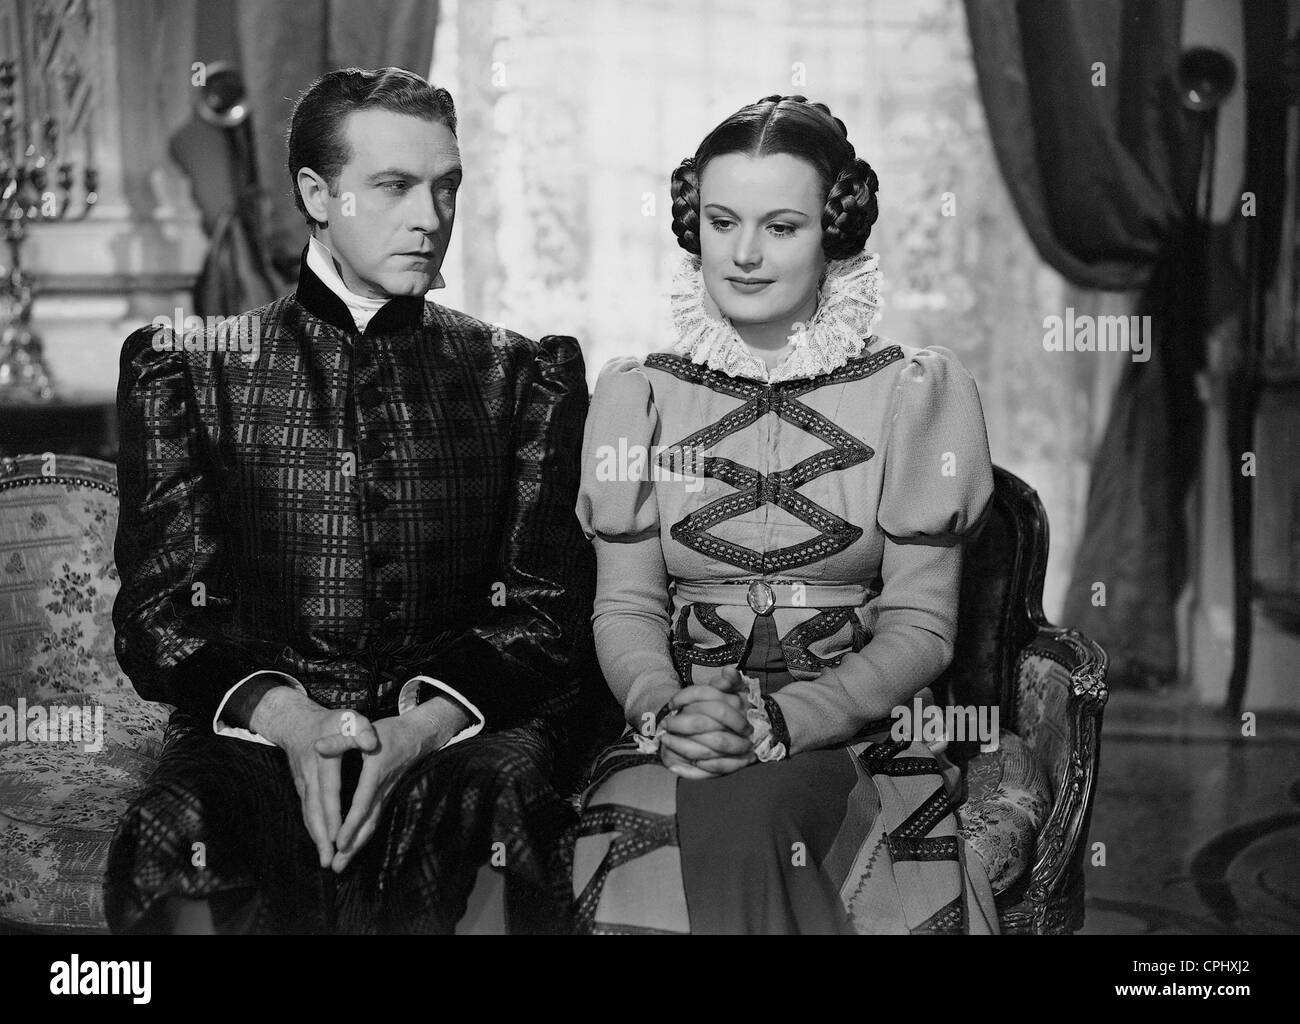 Willy Fritsch e Maria Holst in "Sangue viennese", 1942 Foto Stock